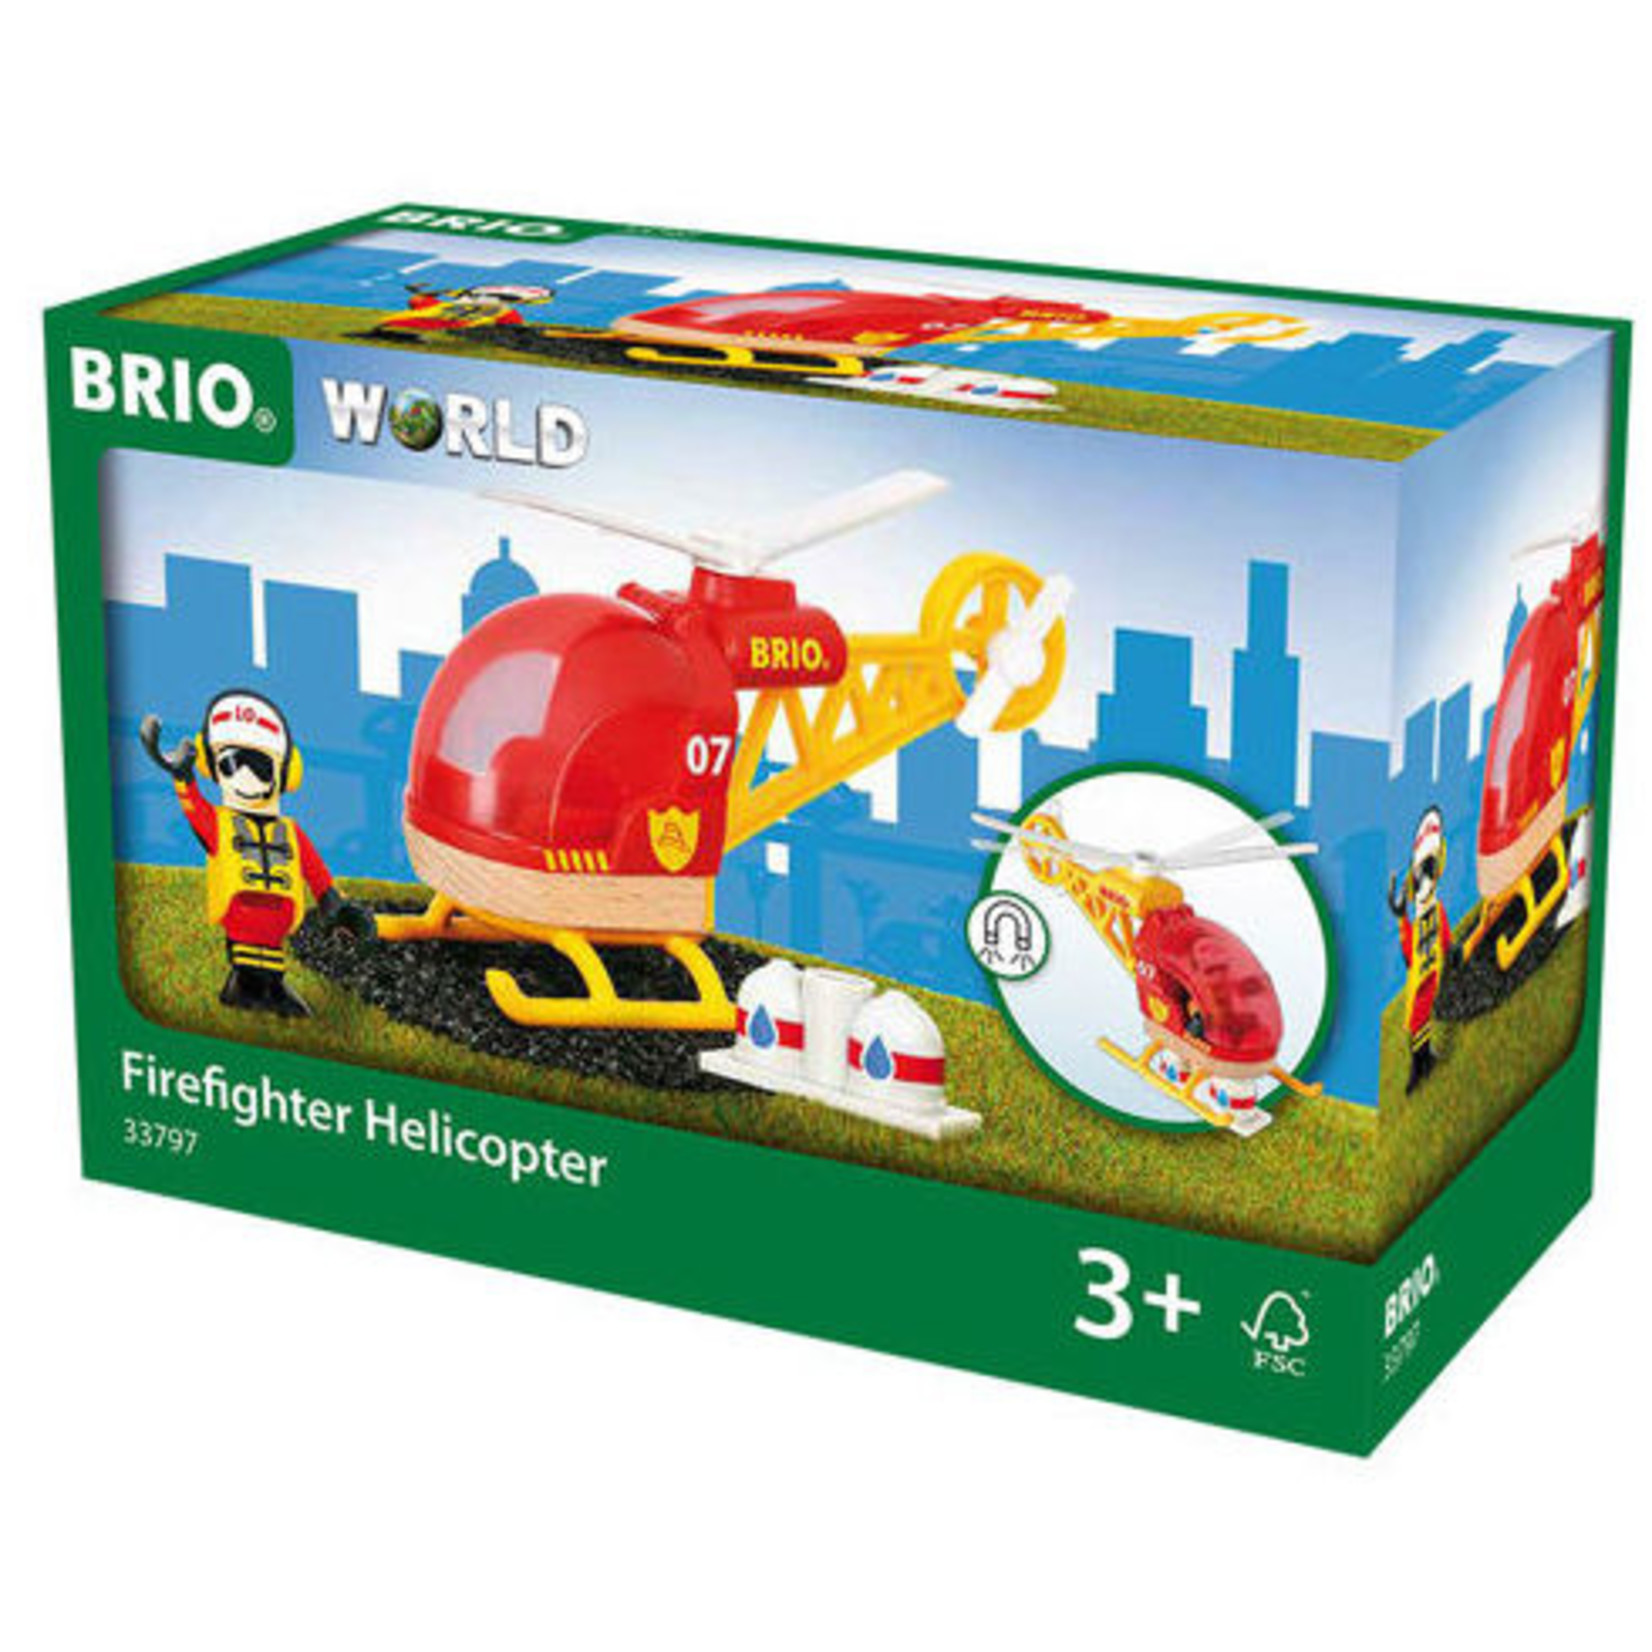 BRIO 33797 FIREFIGHTER HELICOPTER